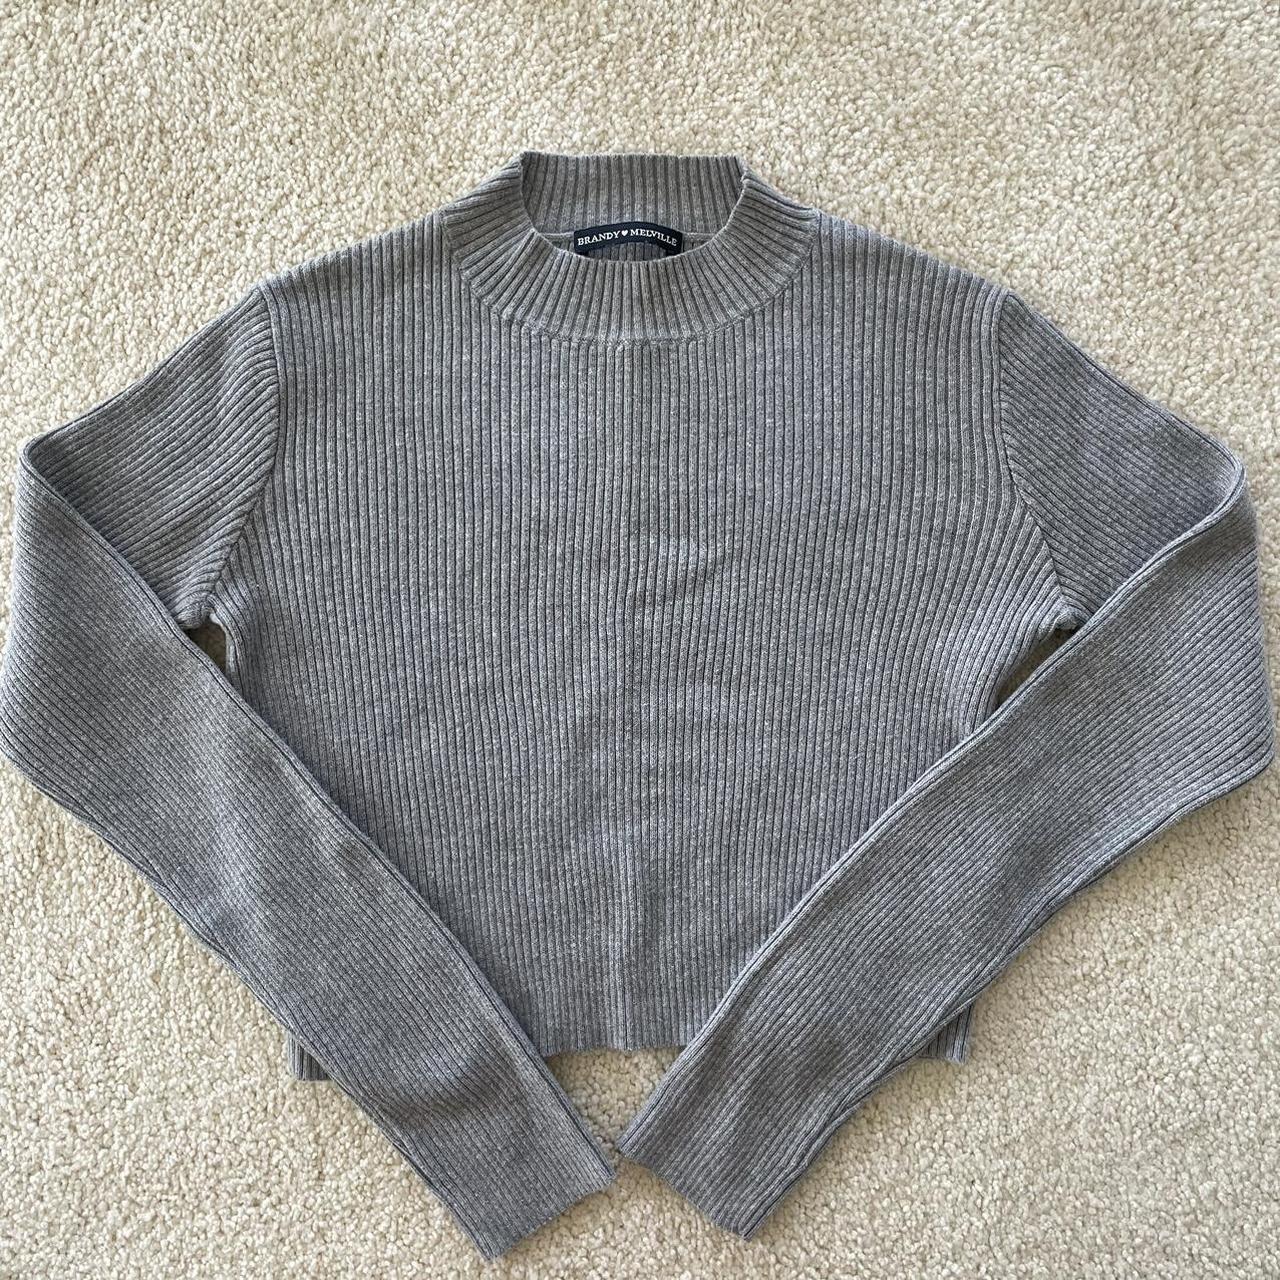 Brandy Melville grey sweater. Super soft and cozy!! - Depop